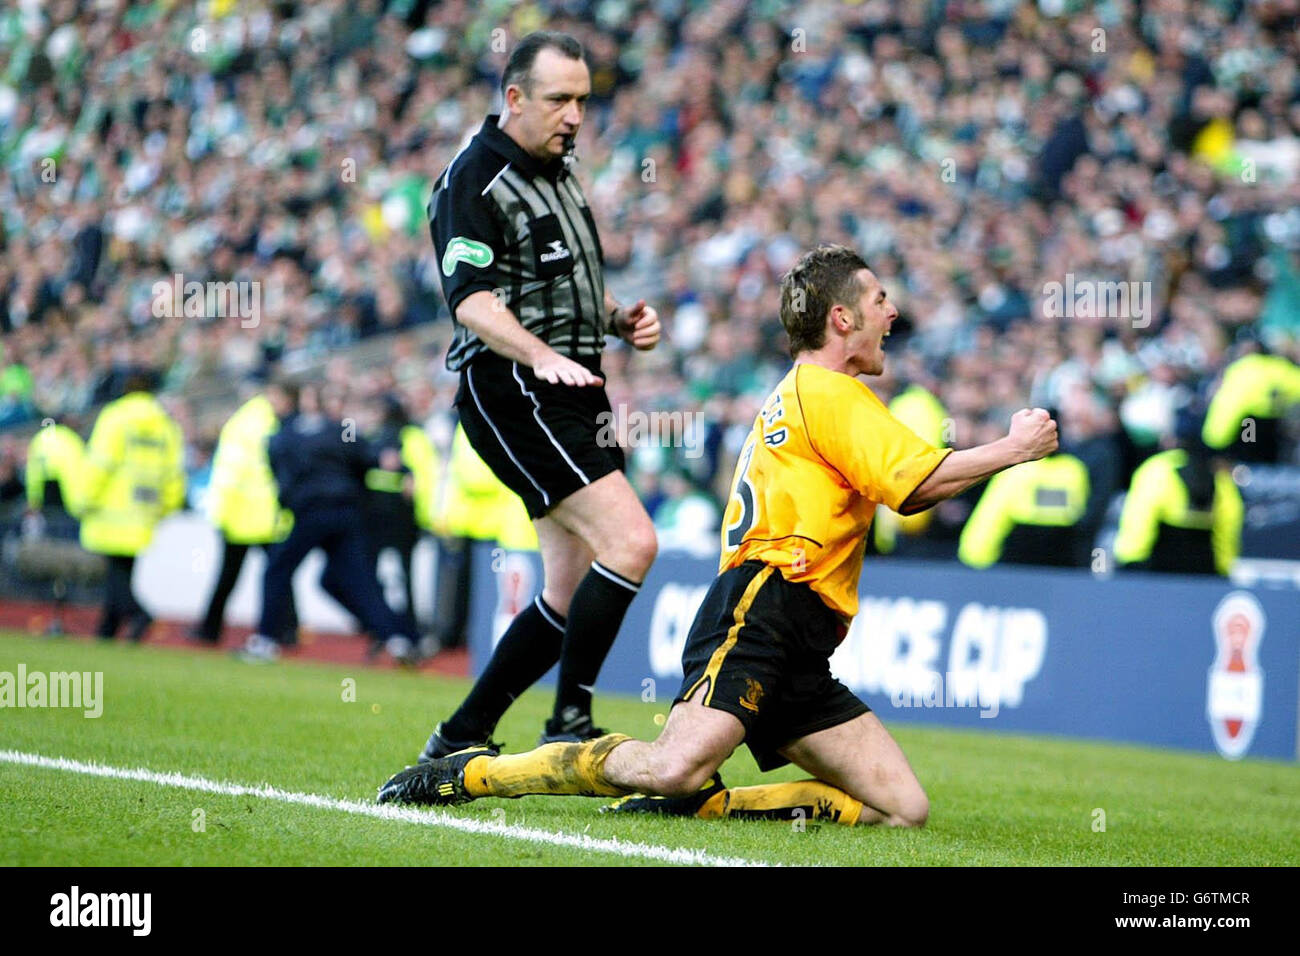 Livington's Jamie McAllister celebrates after scoring the second goal against Hibernian during the CIS Insurance Cup final at Hampden Park, Glasgow. Livingston won 2-0. EDITORIAL USE ONLY. Stock Photo